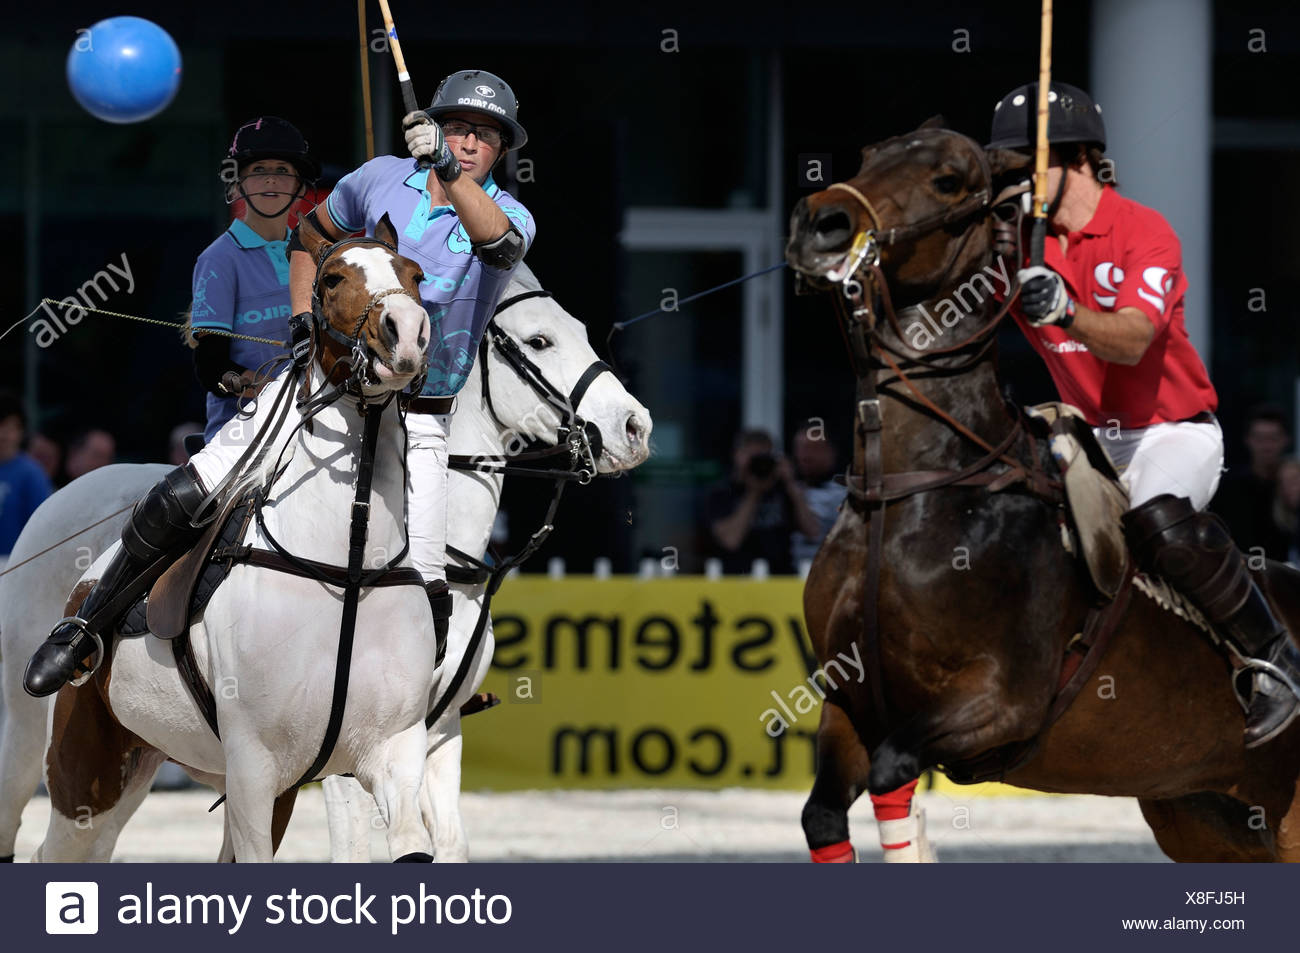 Tom Tailor Polo Team High Resolution Stock Photography and Images - Alamy